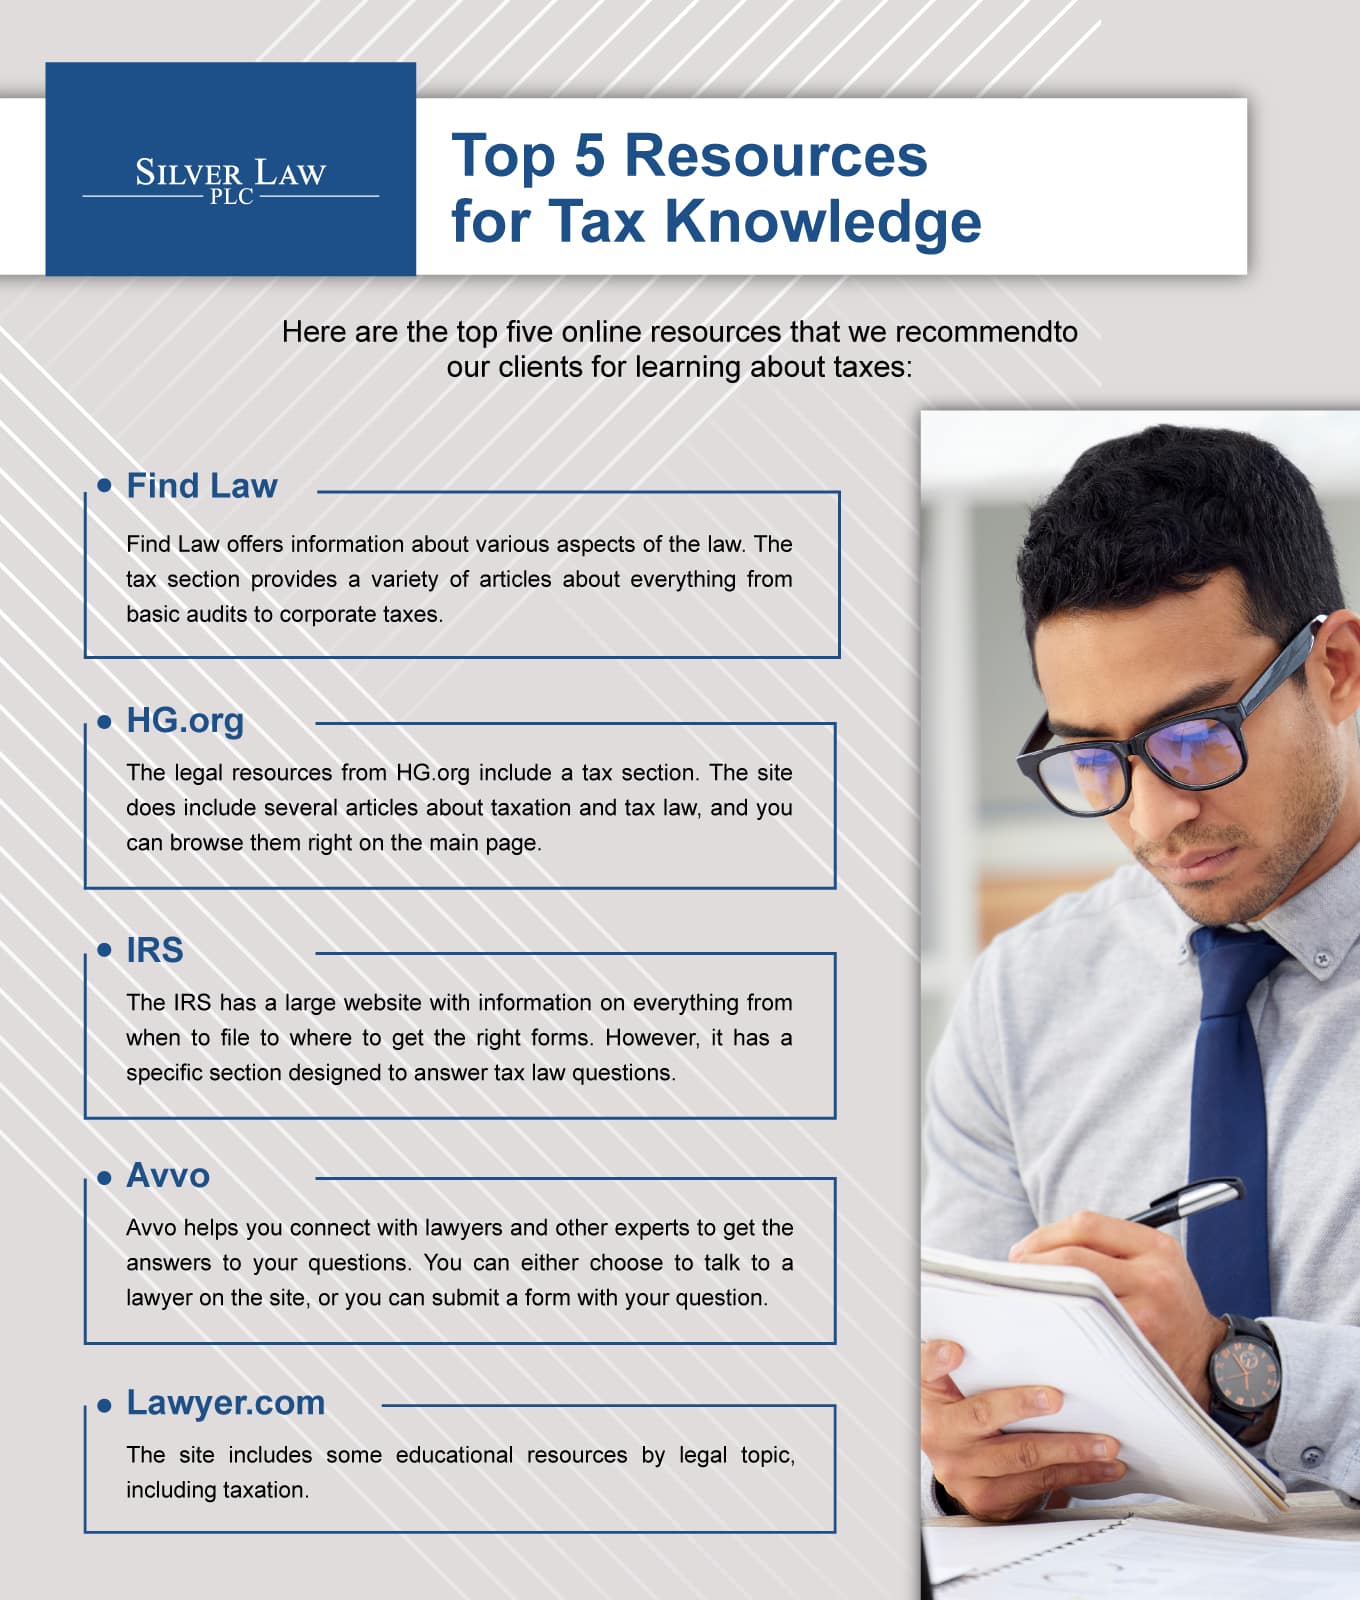 An infographic that shows the top 5 resources for tax knowledge